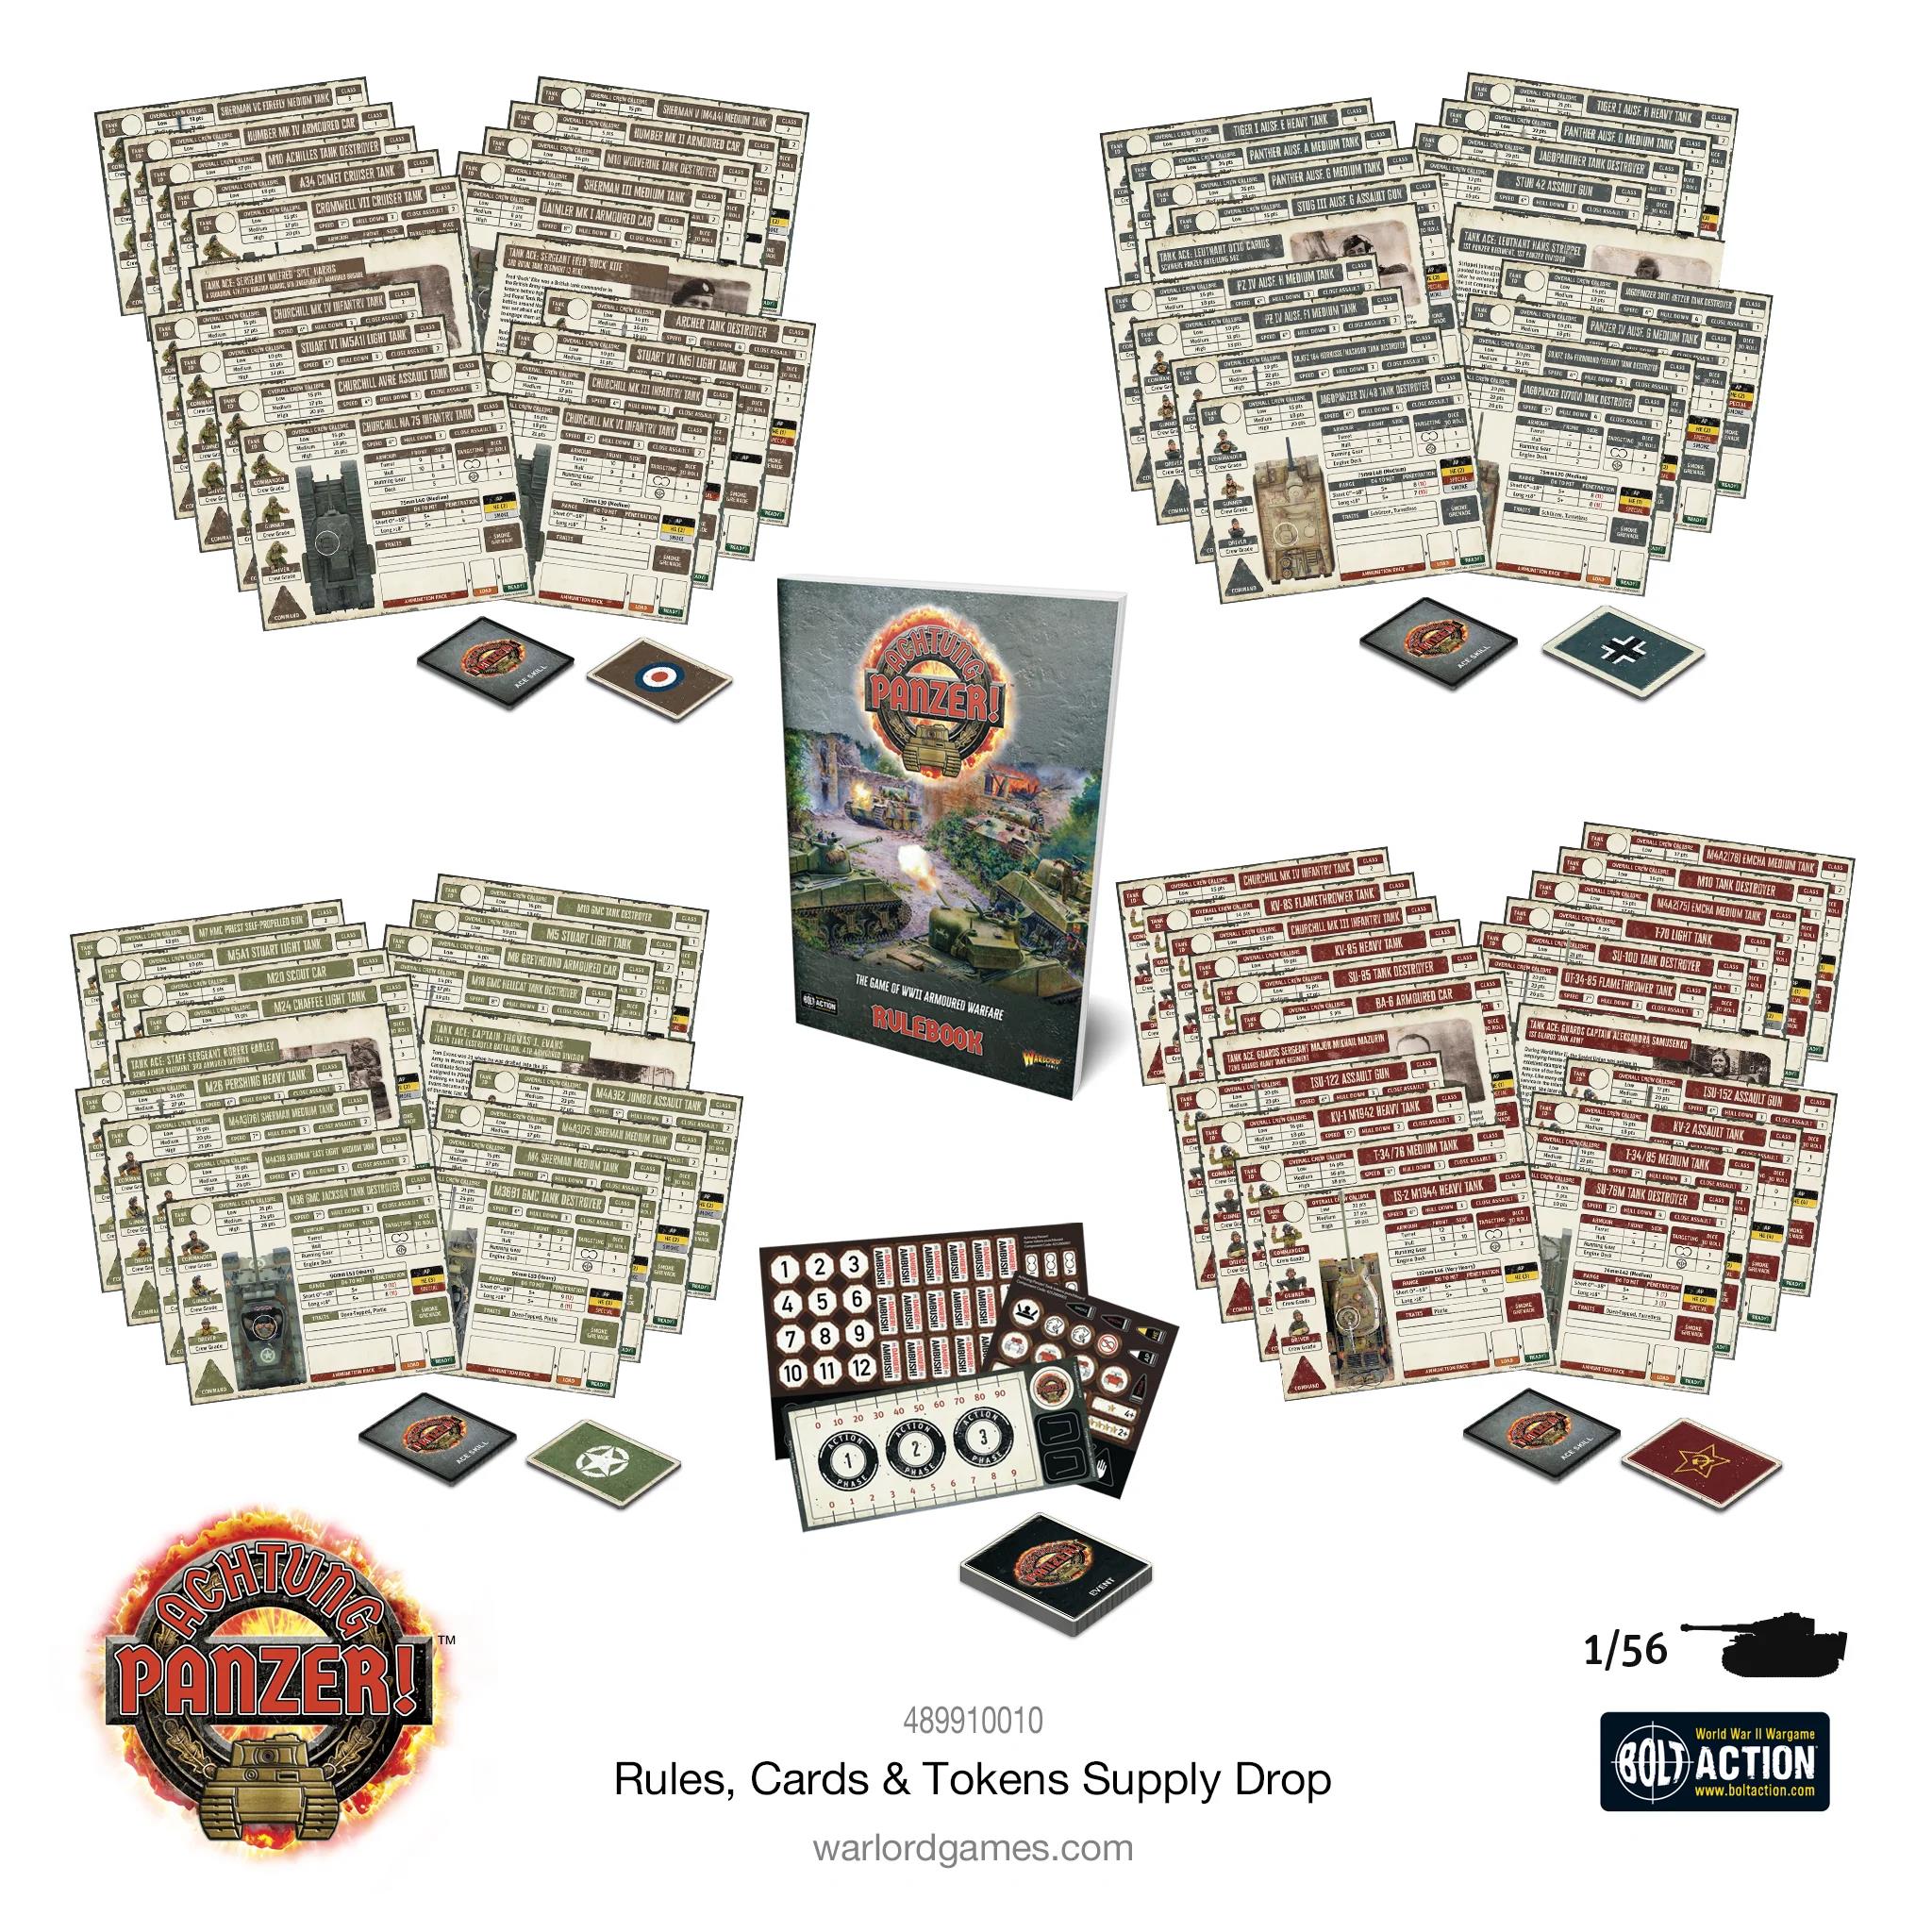  Achtung Panzer! Rules, Cards & Tokens Supply Drop